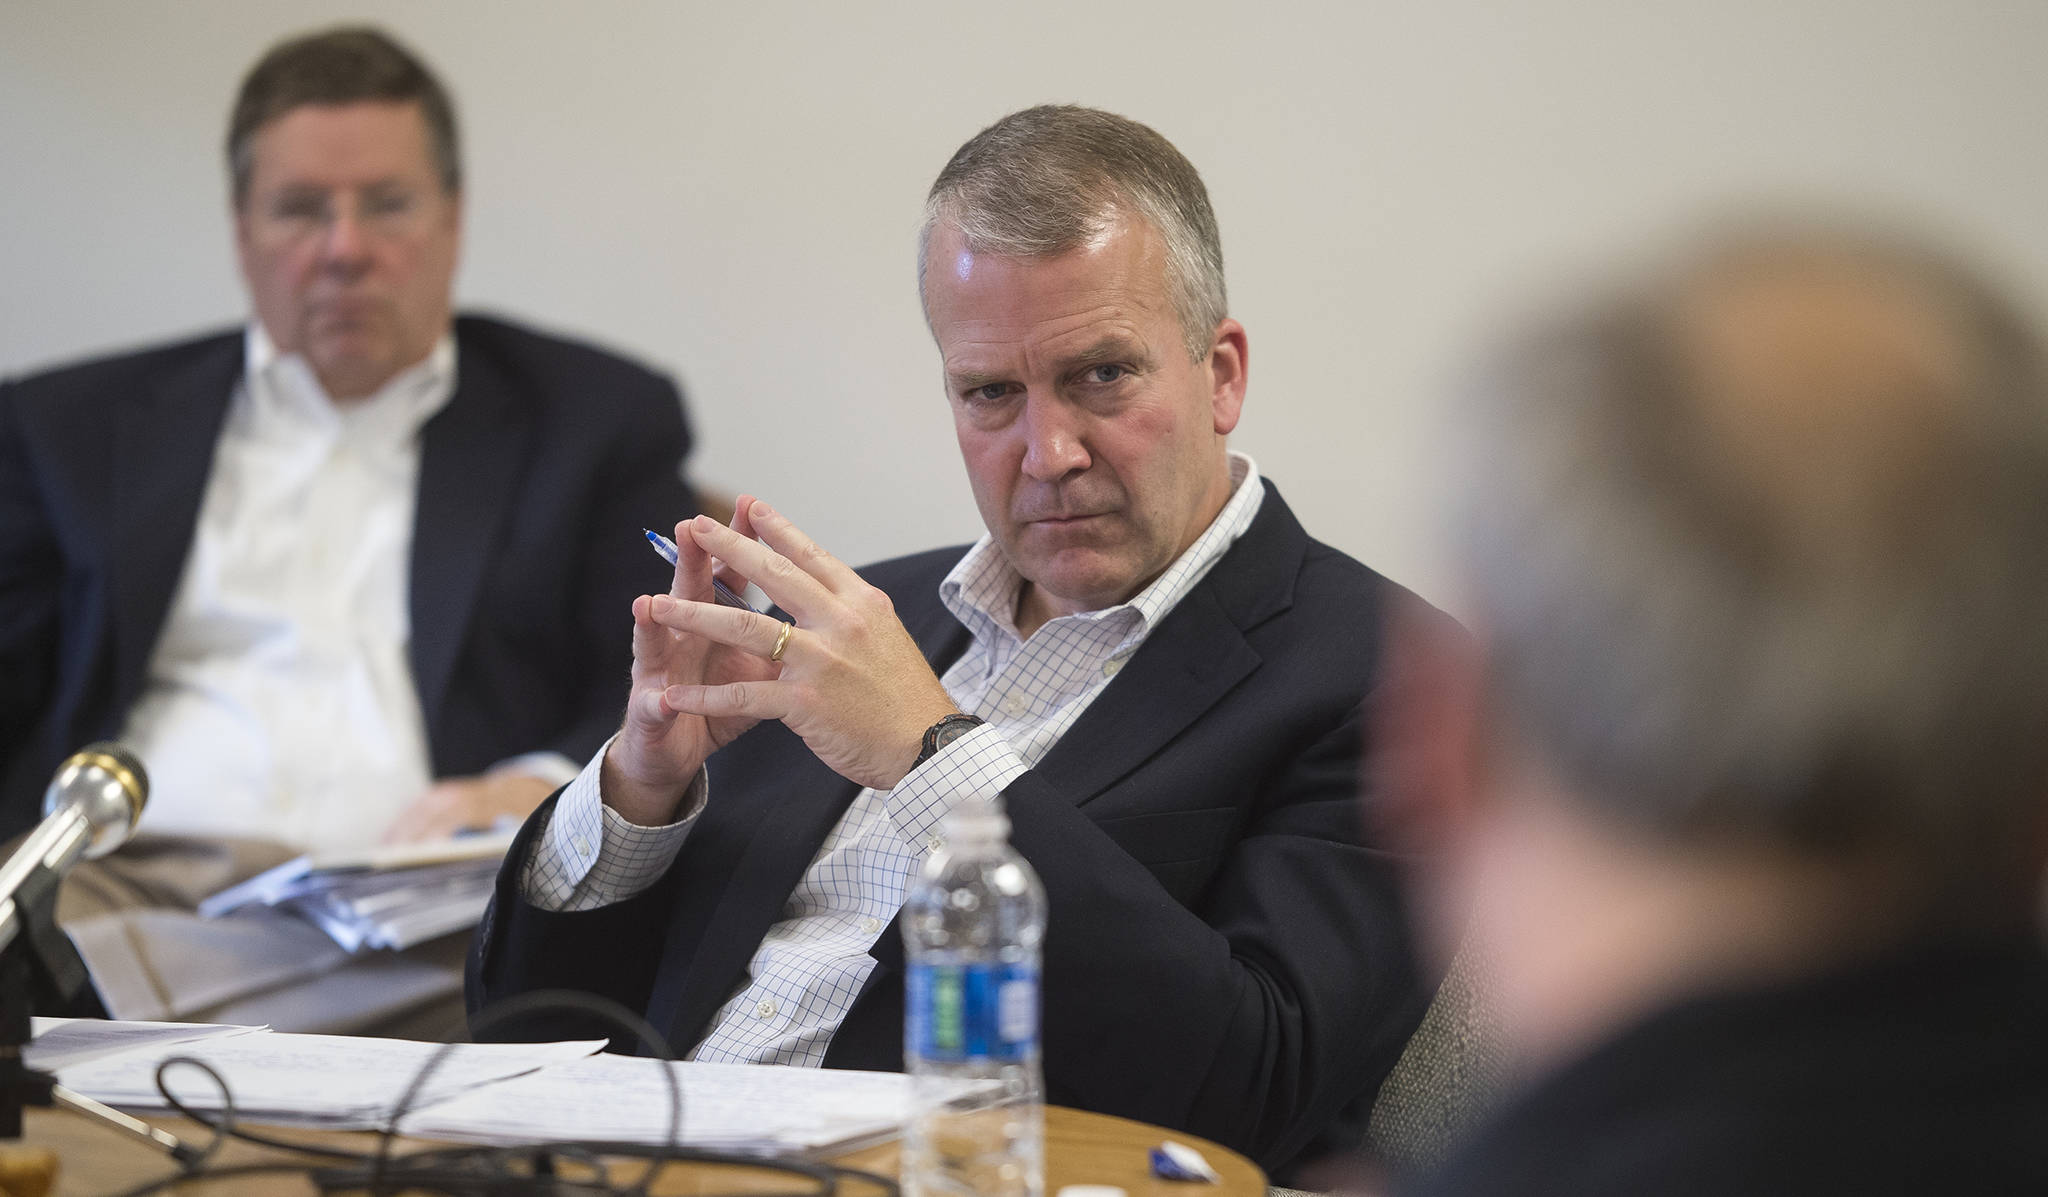 U.S. Sen. Dan Sullivan, R-Alaska, listens to comments about improving the nation’s tax code as he holds a meeting with local business owners at the Juneau Chamber of Commerce’s office on Monday, Oct. 9, 2017. (Michael Penn | Juneau Empire)